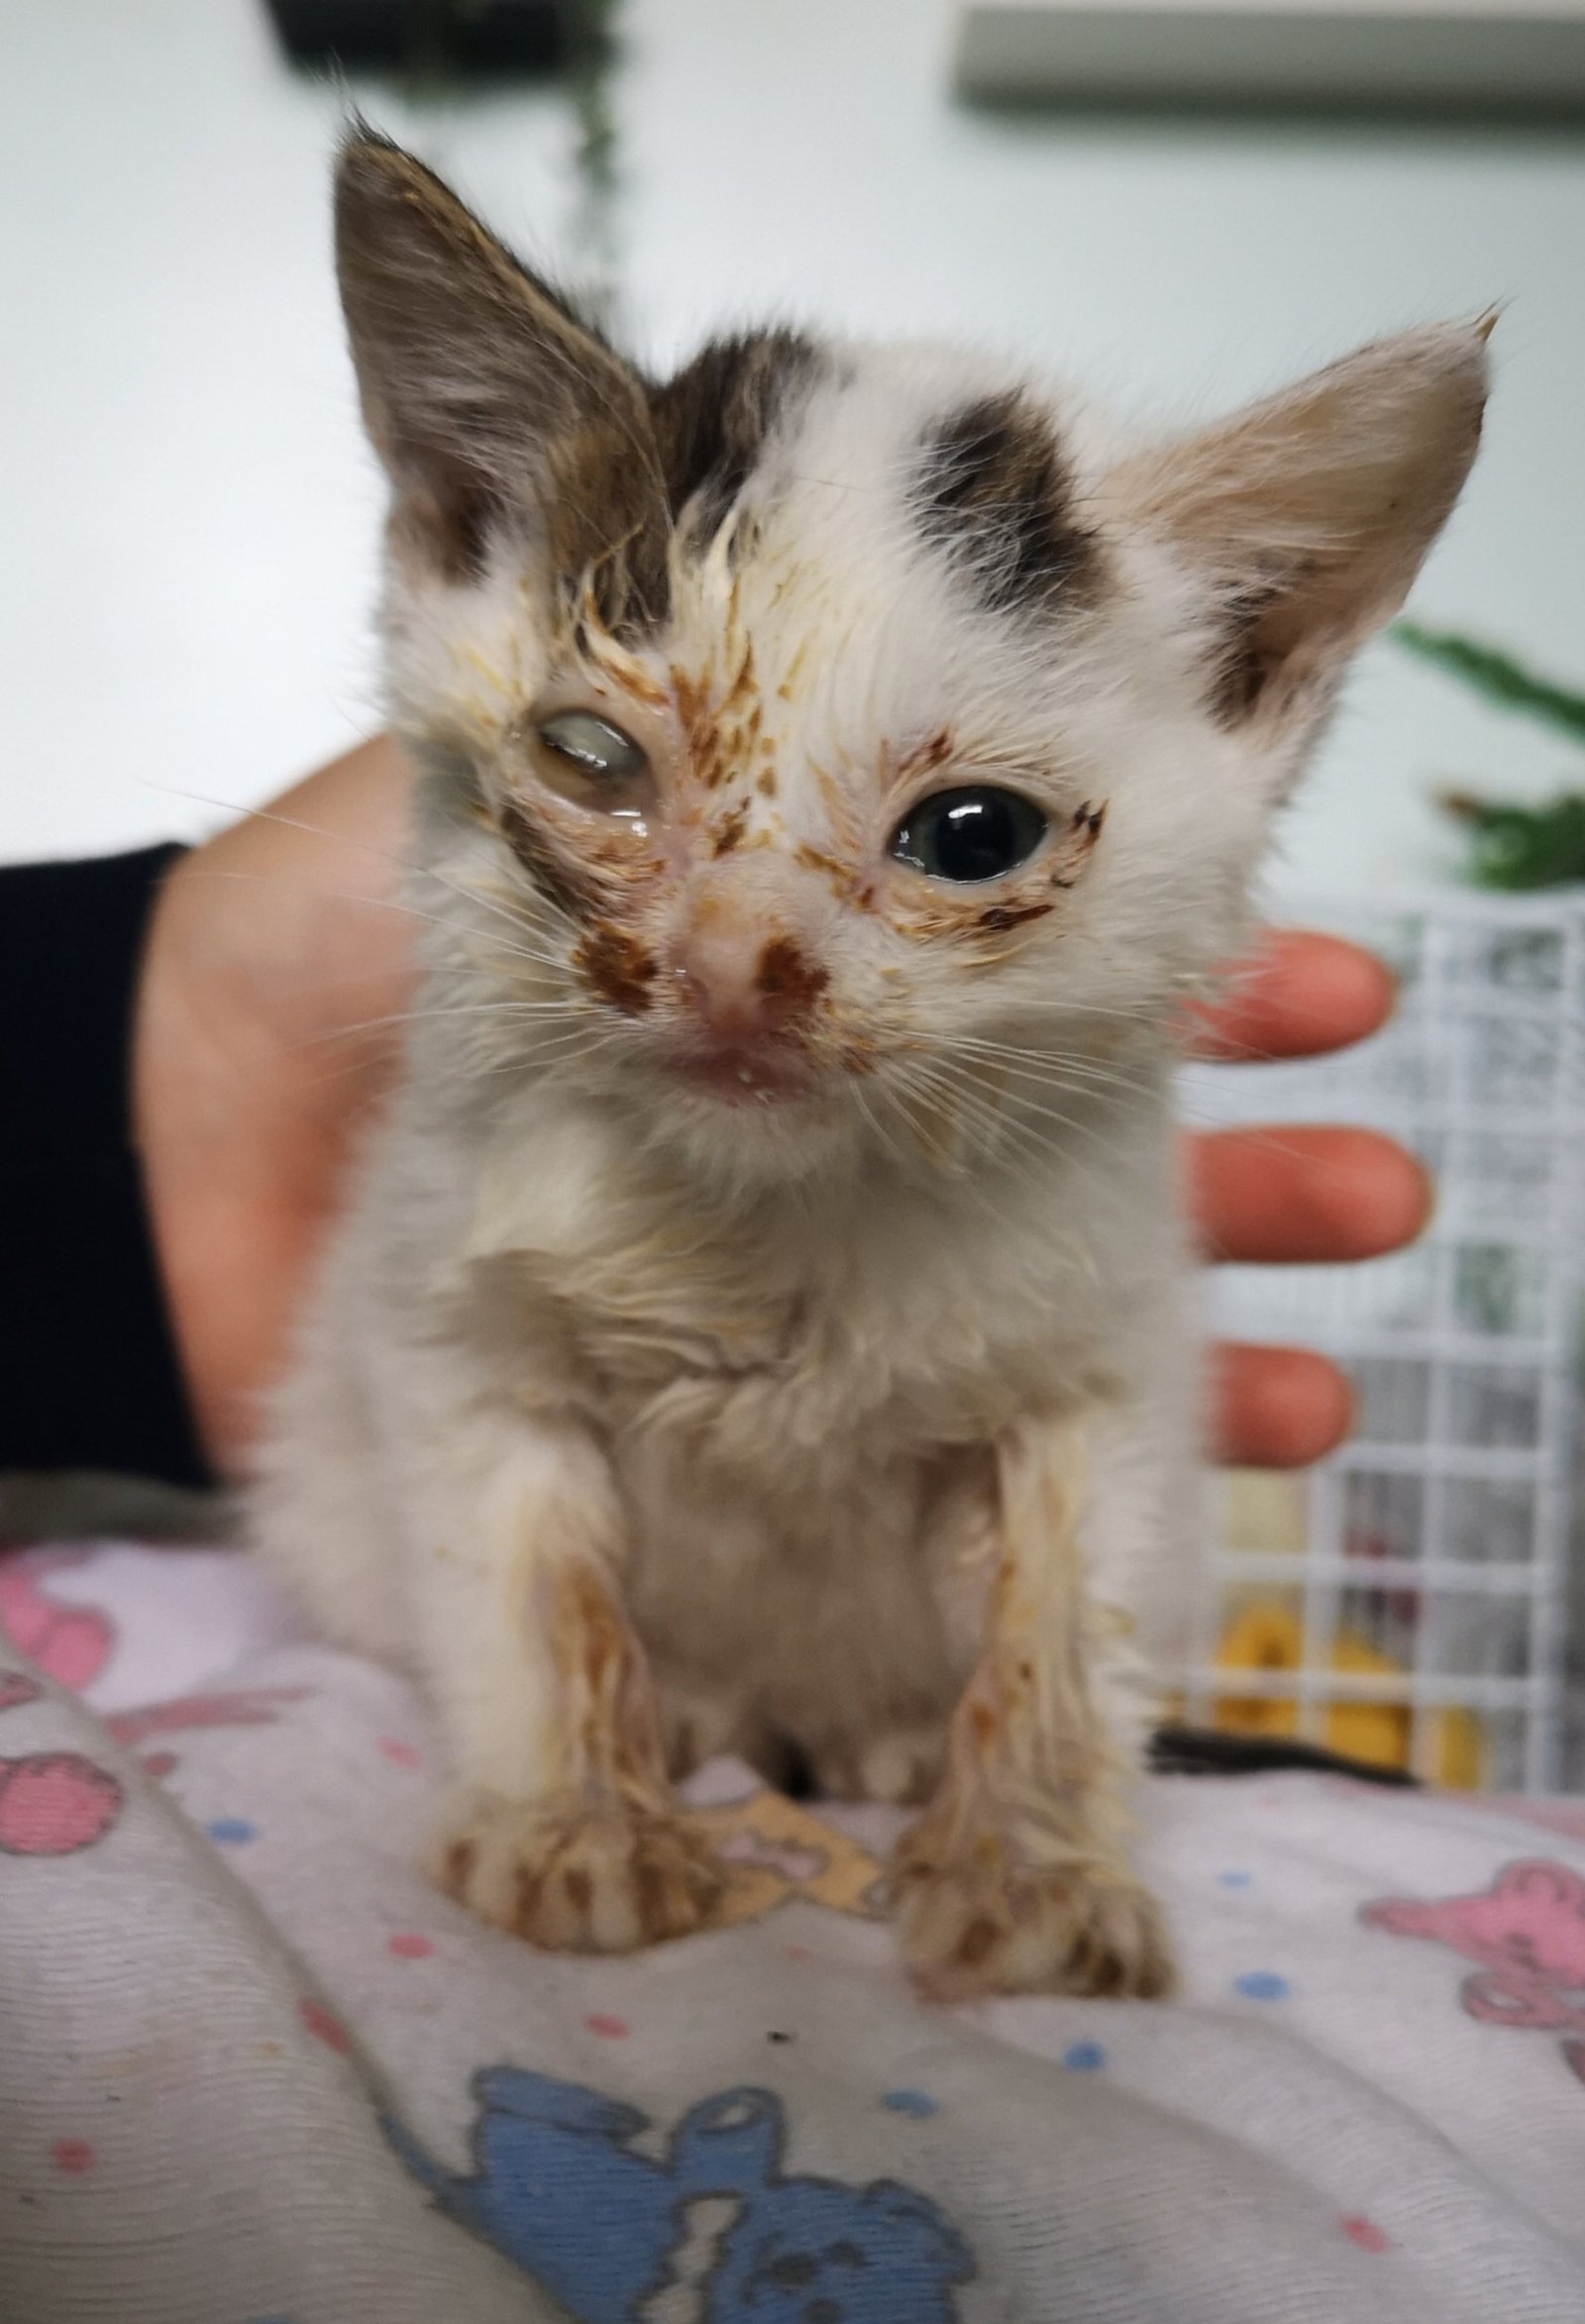 a Kitten found in a scrapyard who's found a new home in time for Christmas